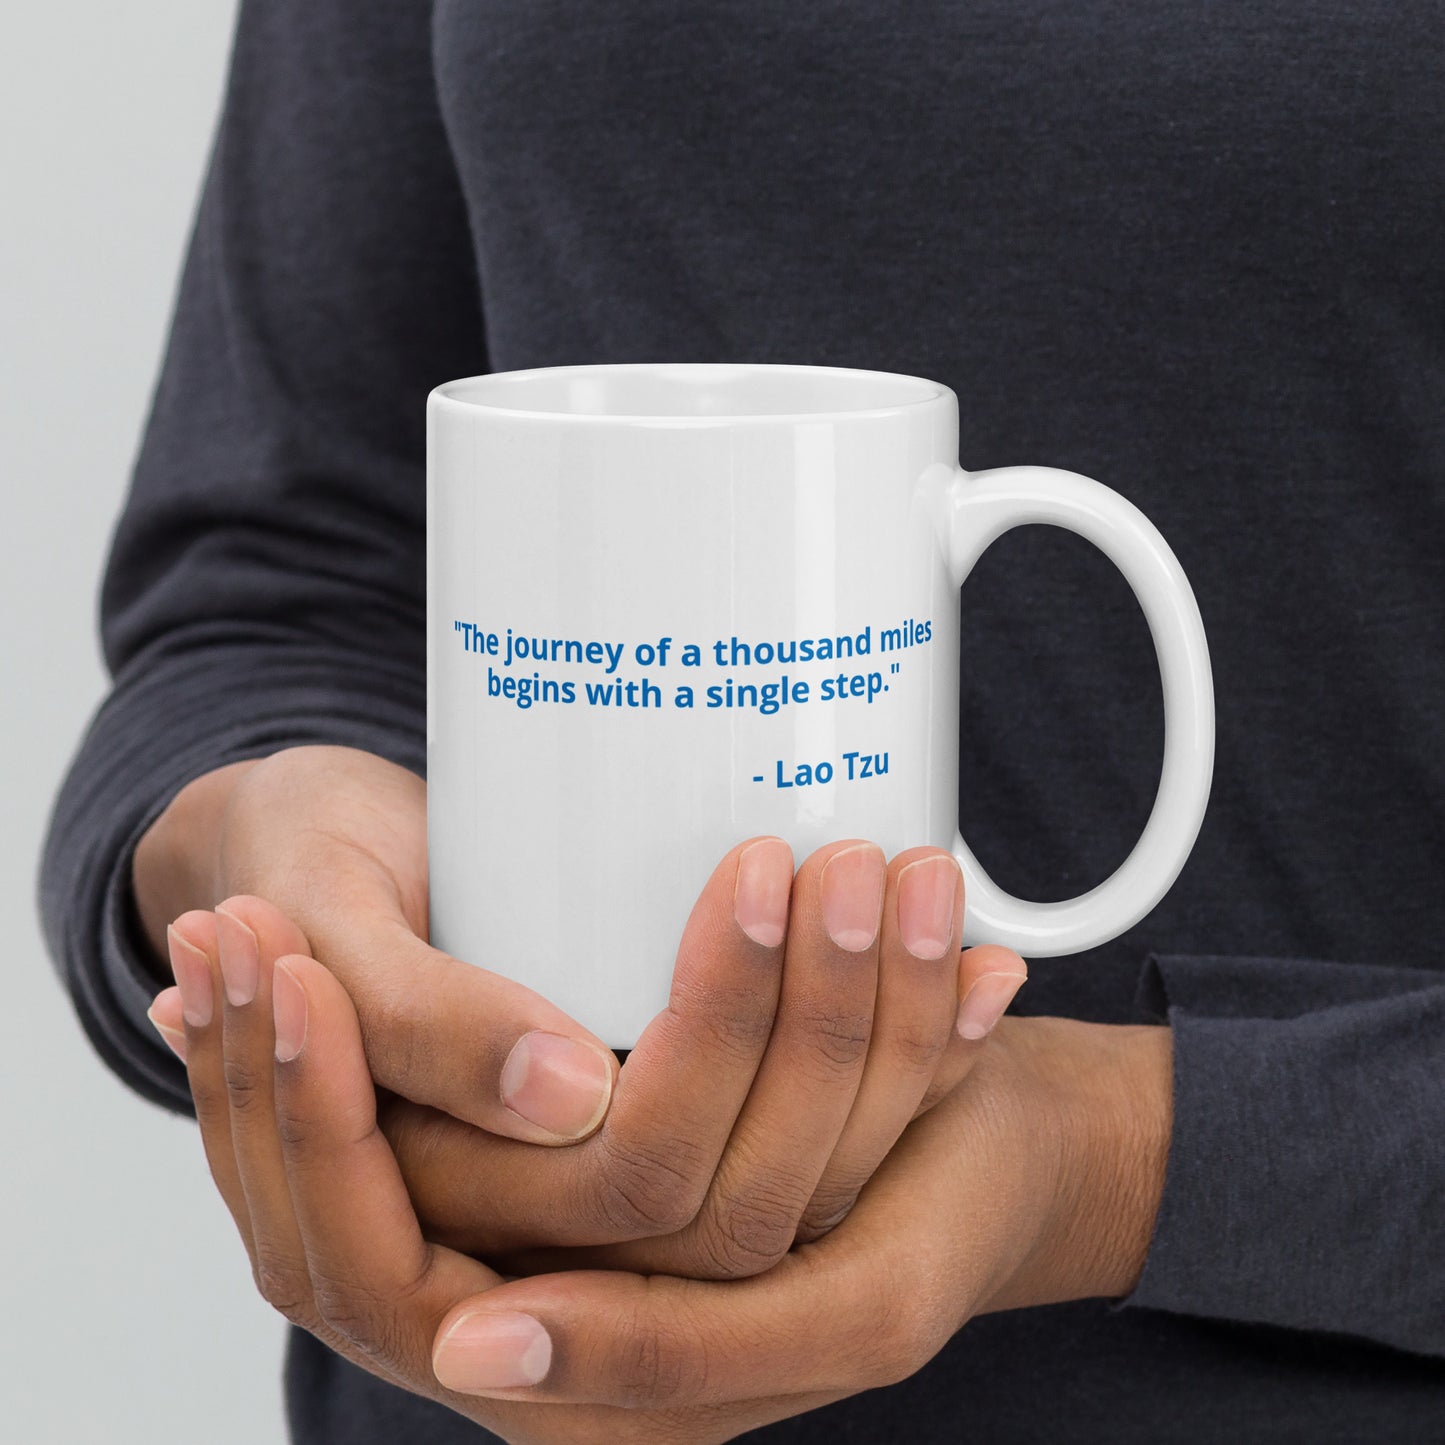 "The journey of a thousand miles begins with a single step." - Lao Tzu - White glossy mug